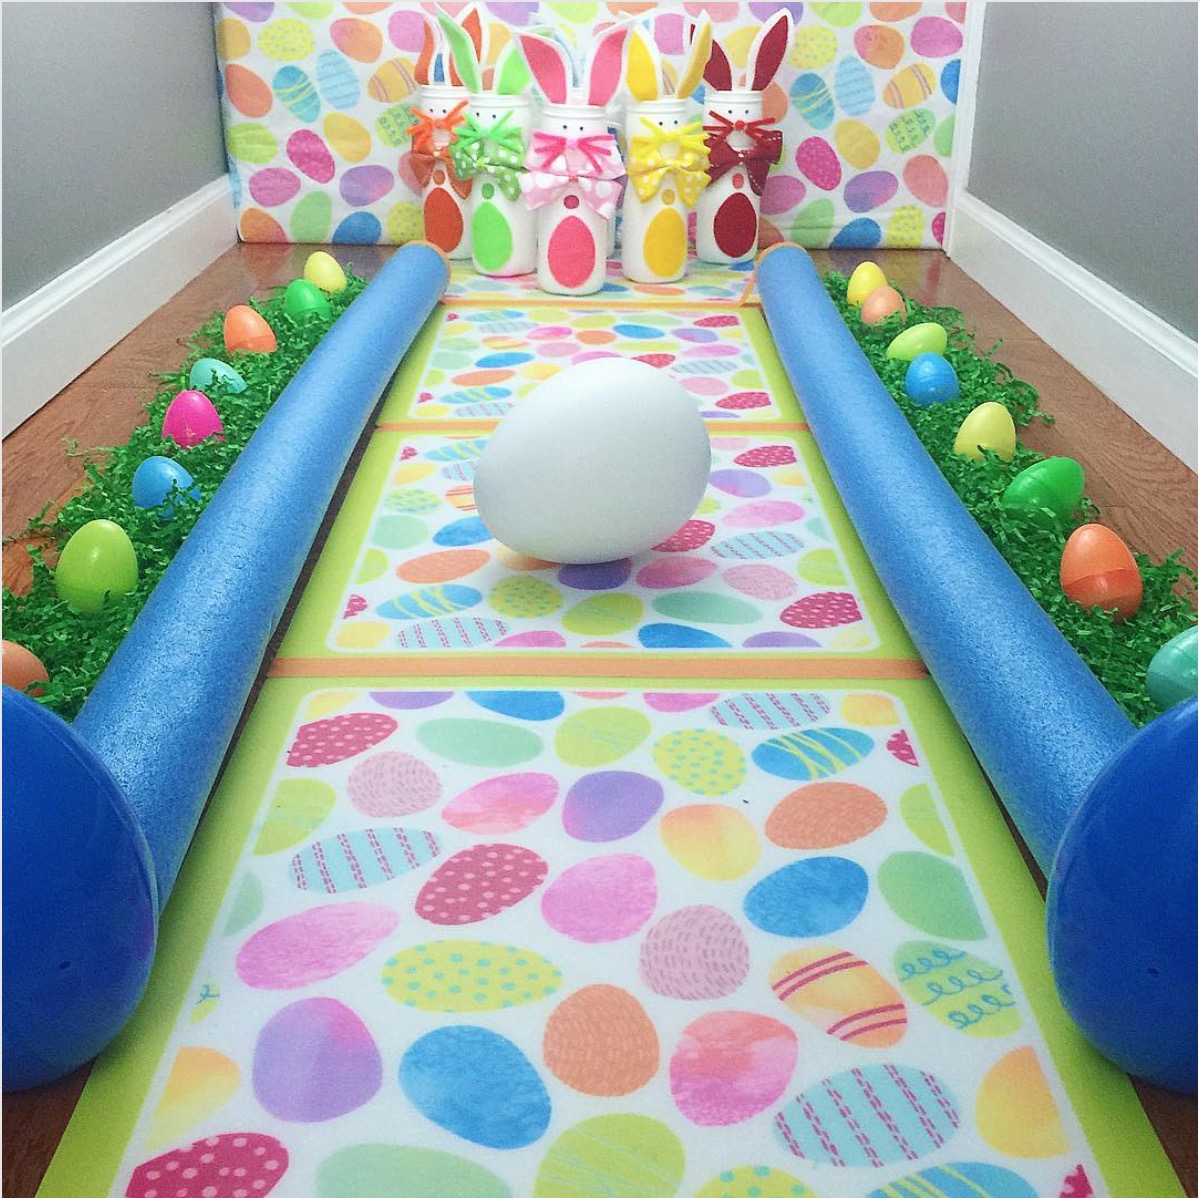 DIY Easter Bowling Alley